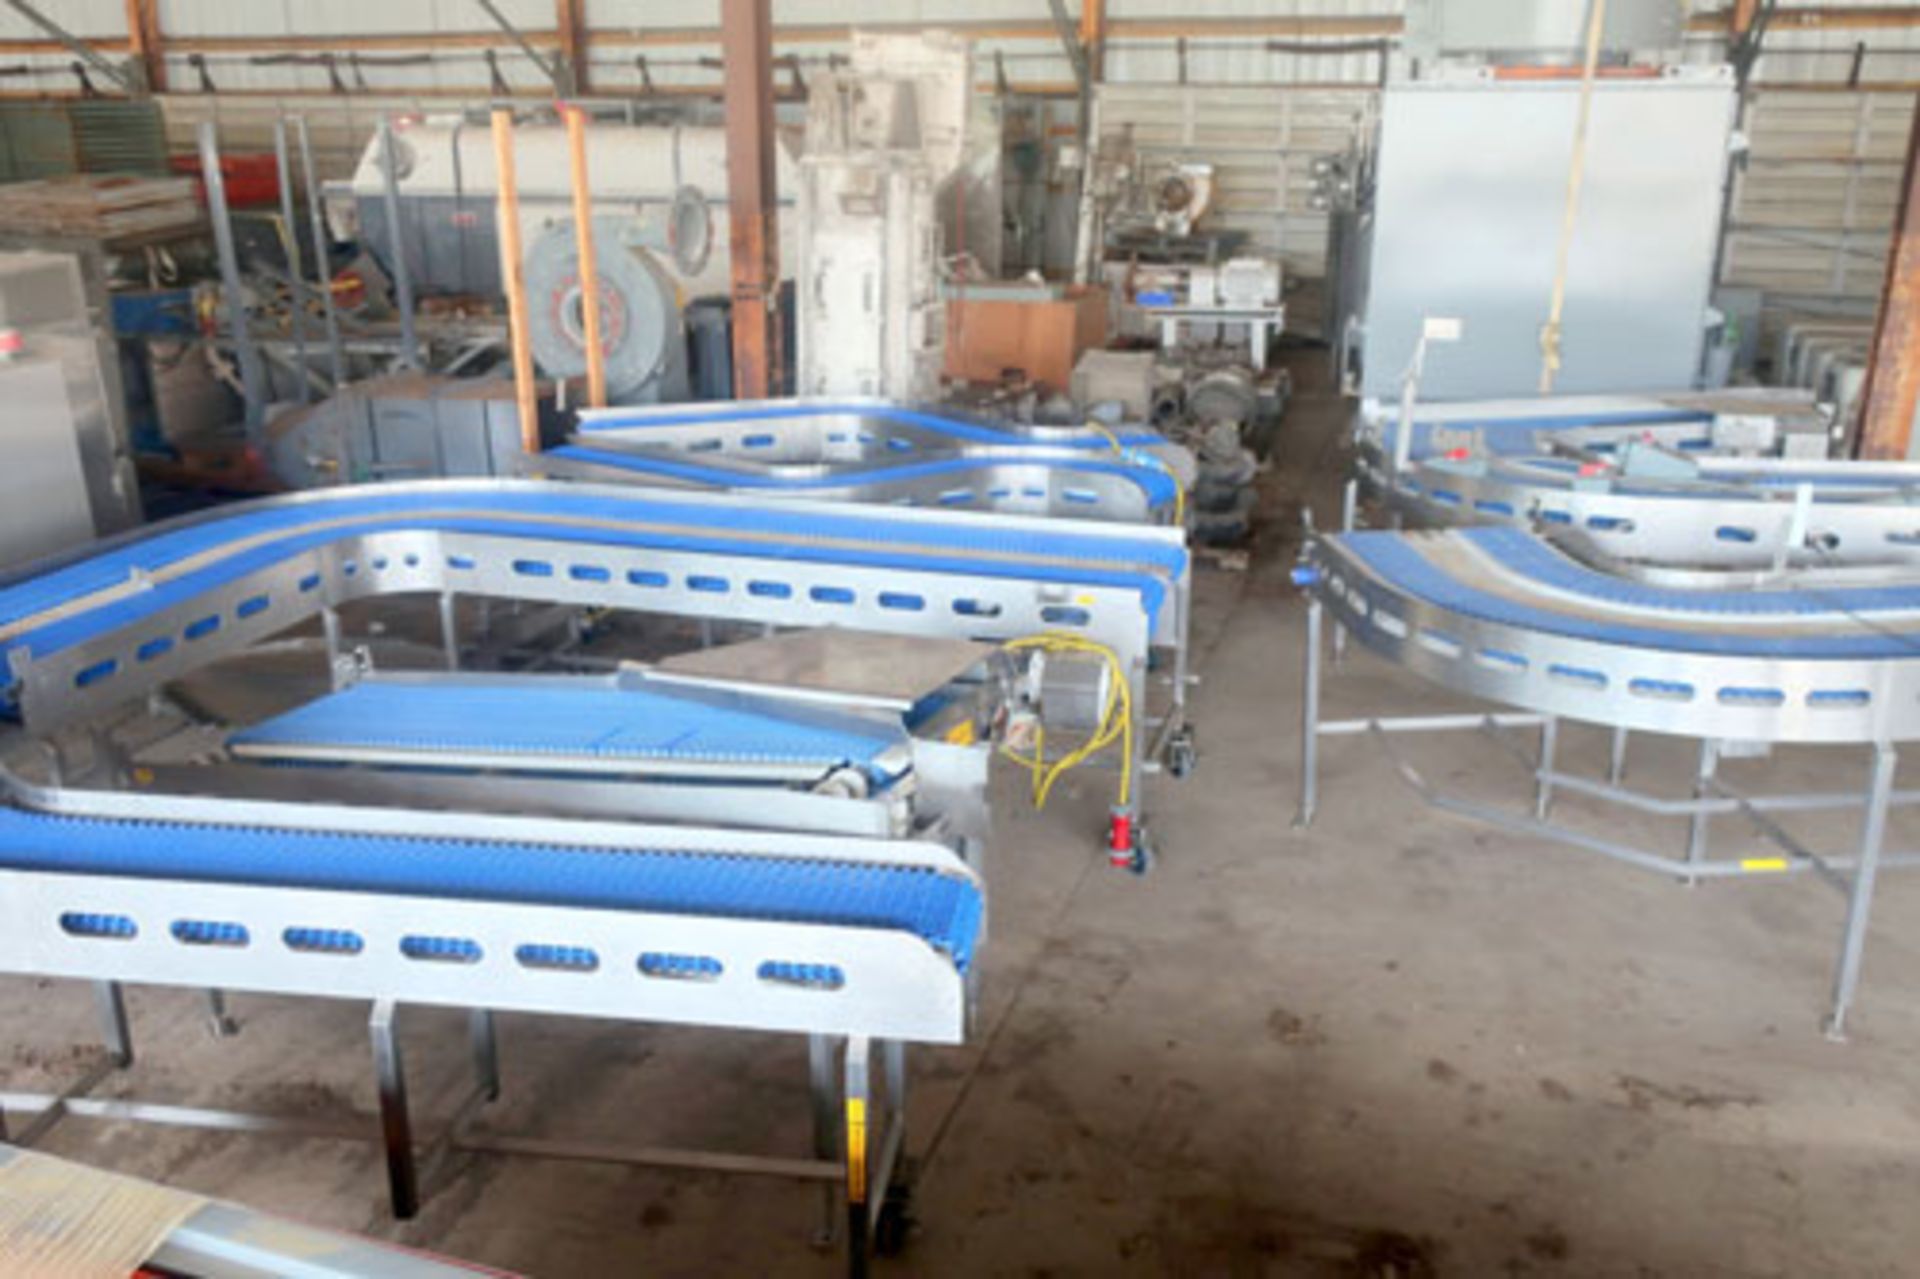 Plastic link belt motorized conveyor system consisting of; (2) sections 30.5" x 80" inclined (no